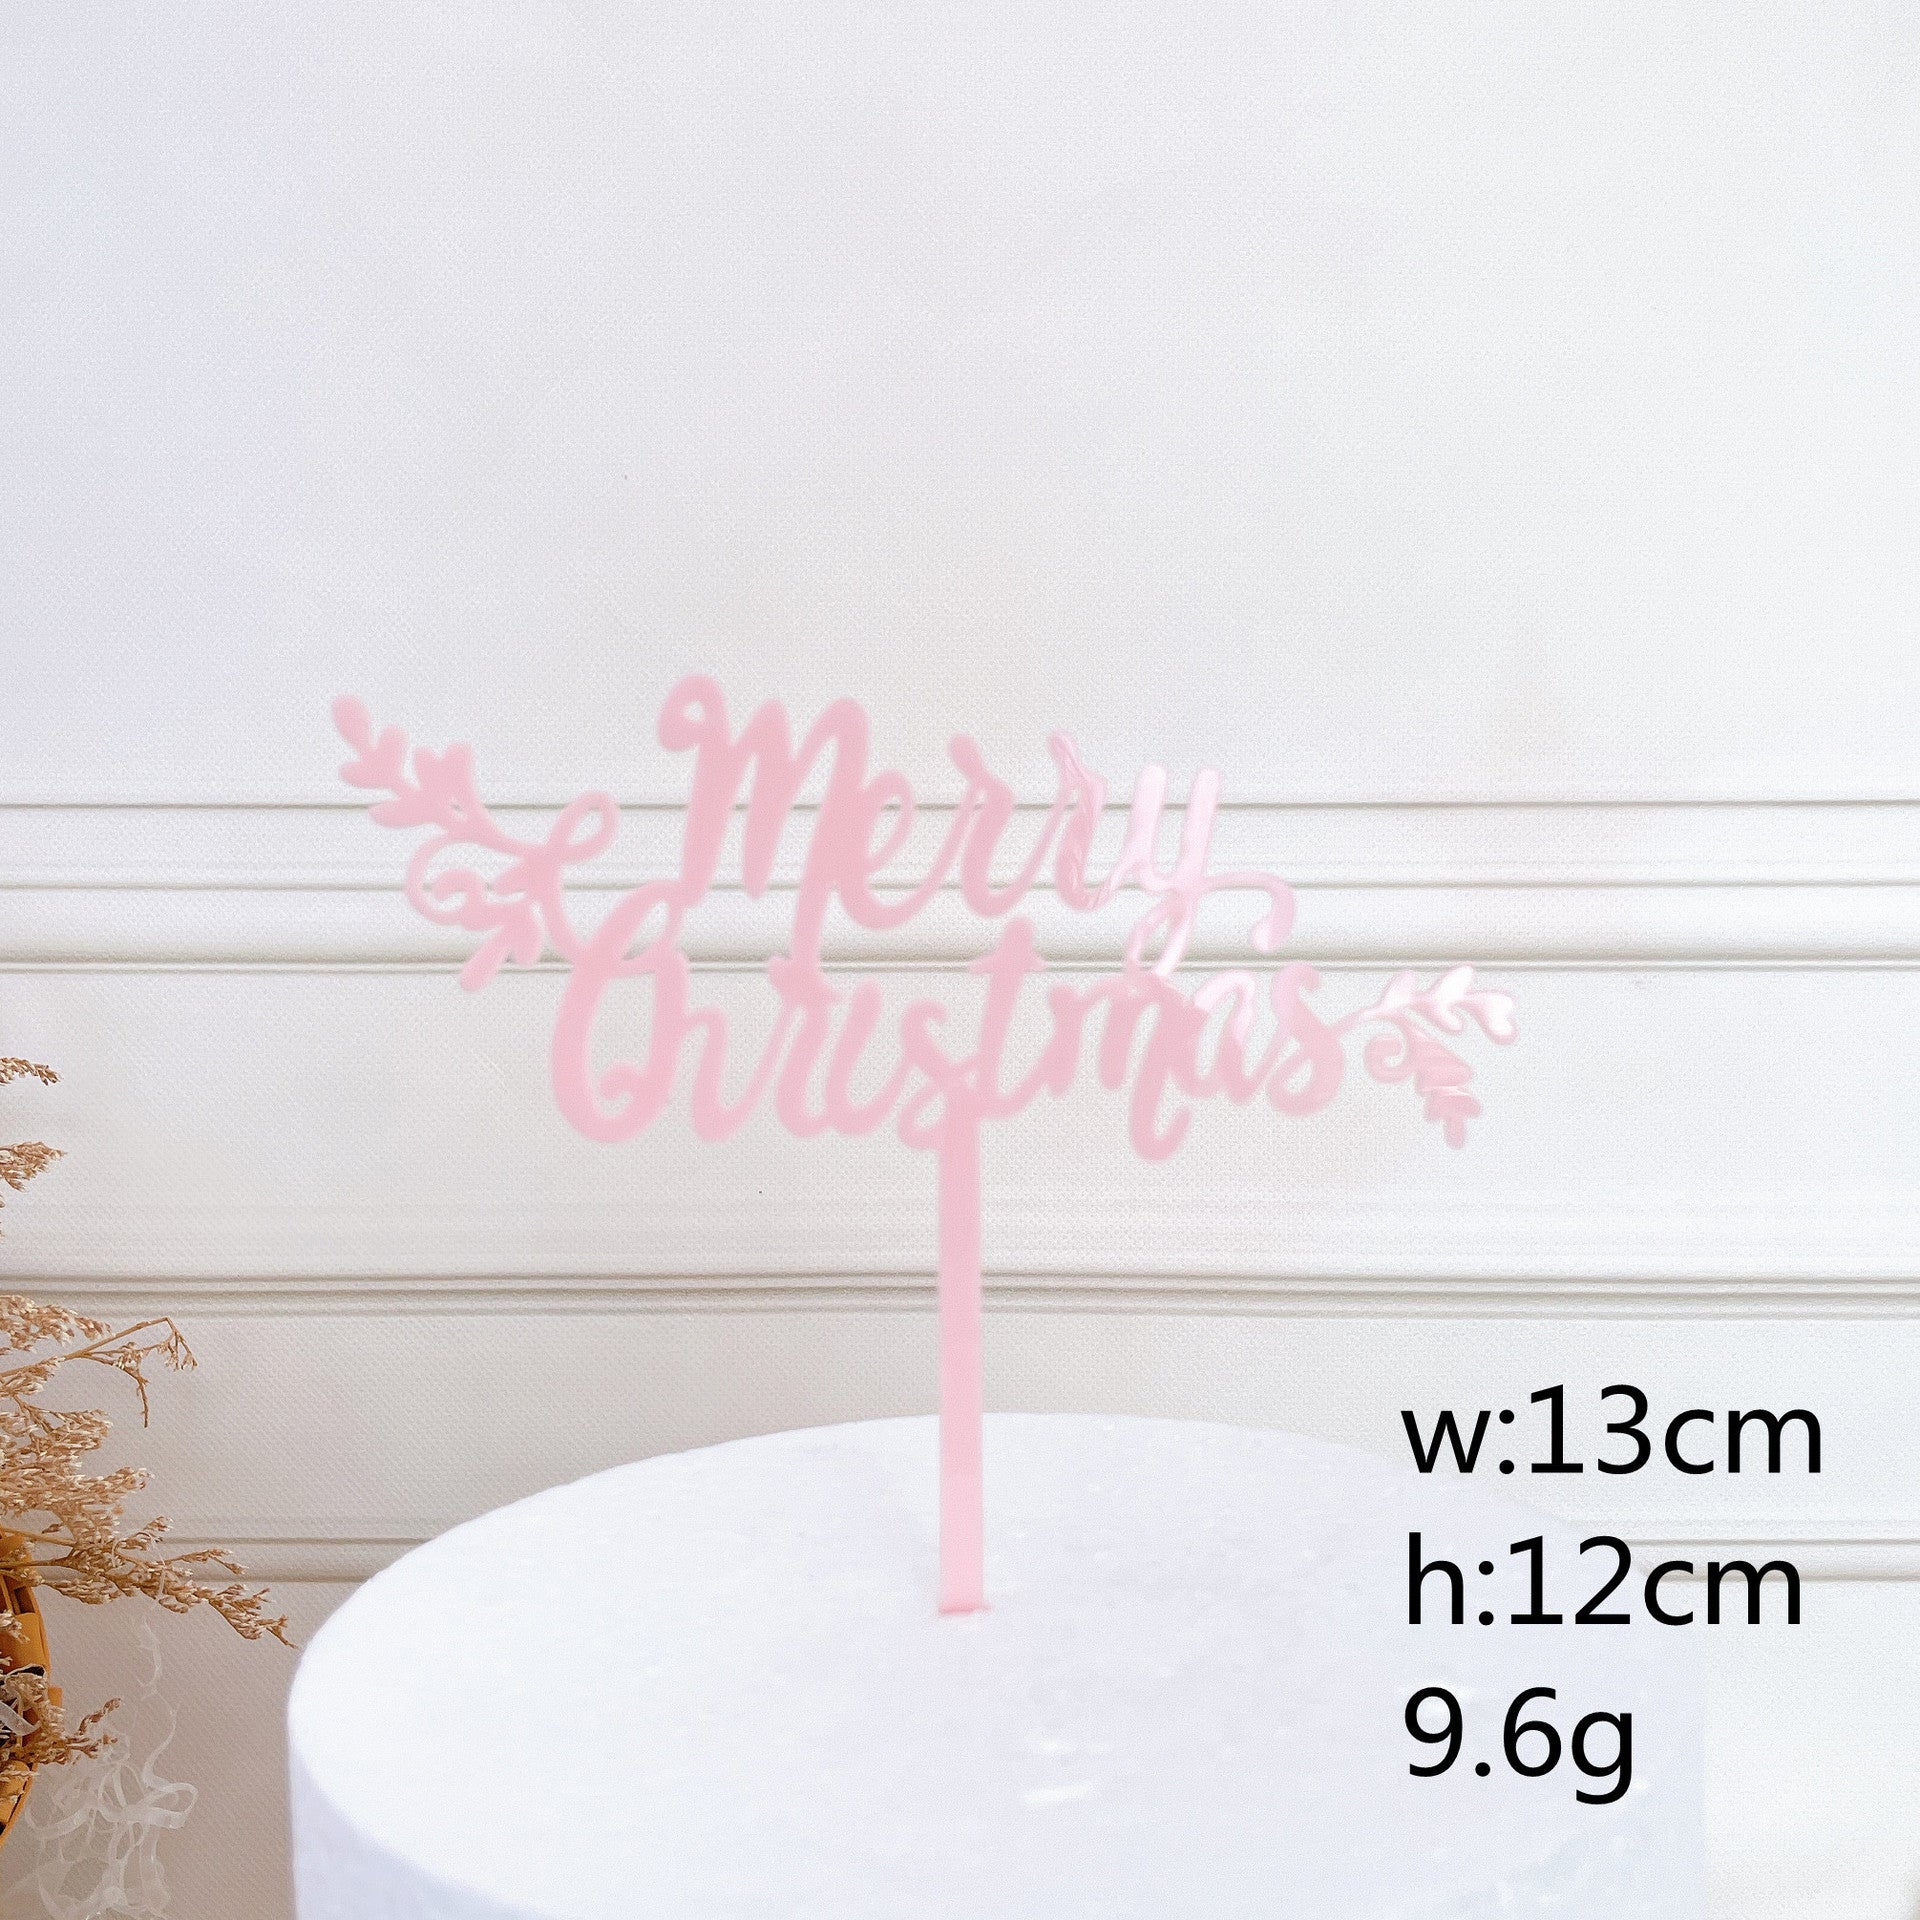 Decorative Acrylic Cake Card Plug-in, Outdoor and Indoor Christmas decorations Items, Christmas ornaments, Christmas tree decorations, salt dough ornaments, Christmas window decorations, cheap Christmas decorations, snowmen, and ornaments.